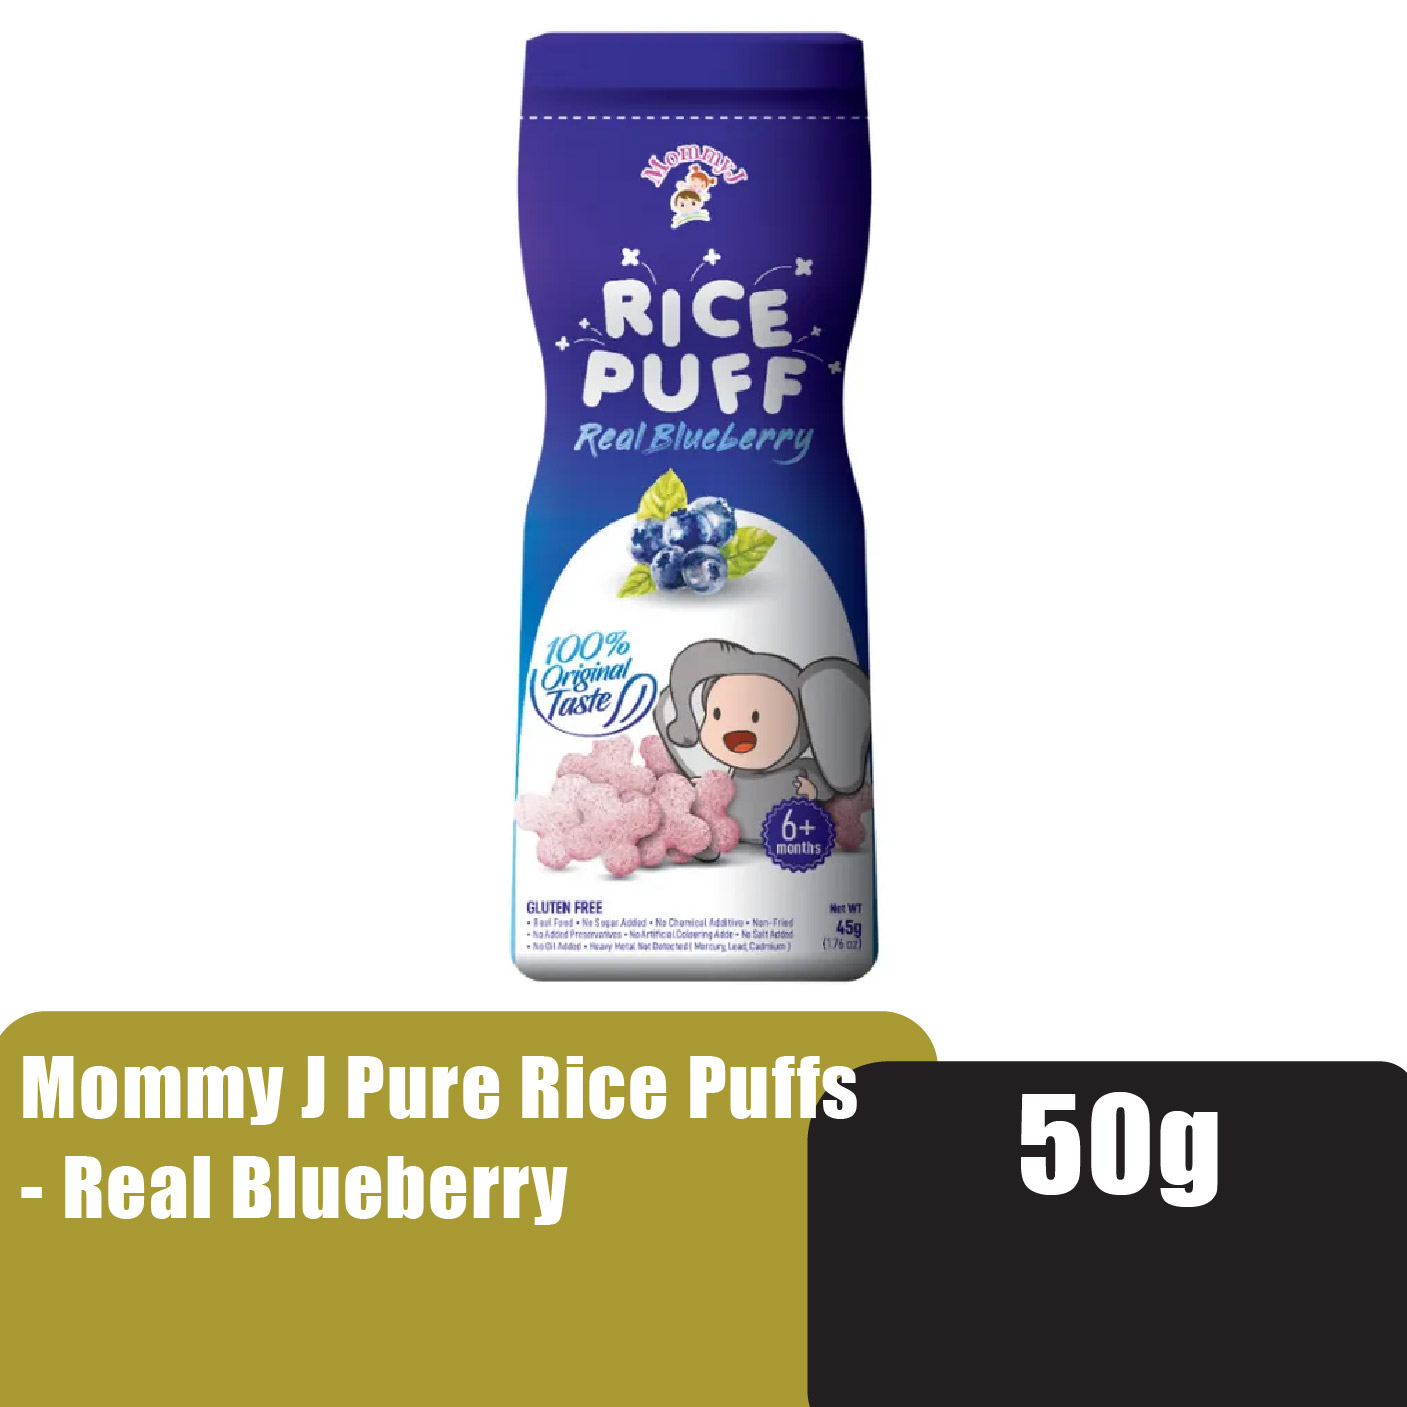 MOMMY J Rice Puff 50g - Real Blueberry (Halal Baby Food, Makanan Baby for 6+ Months)